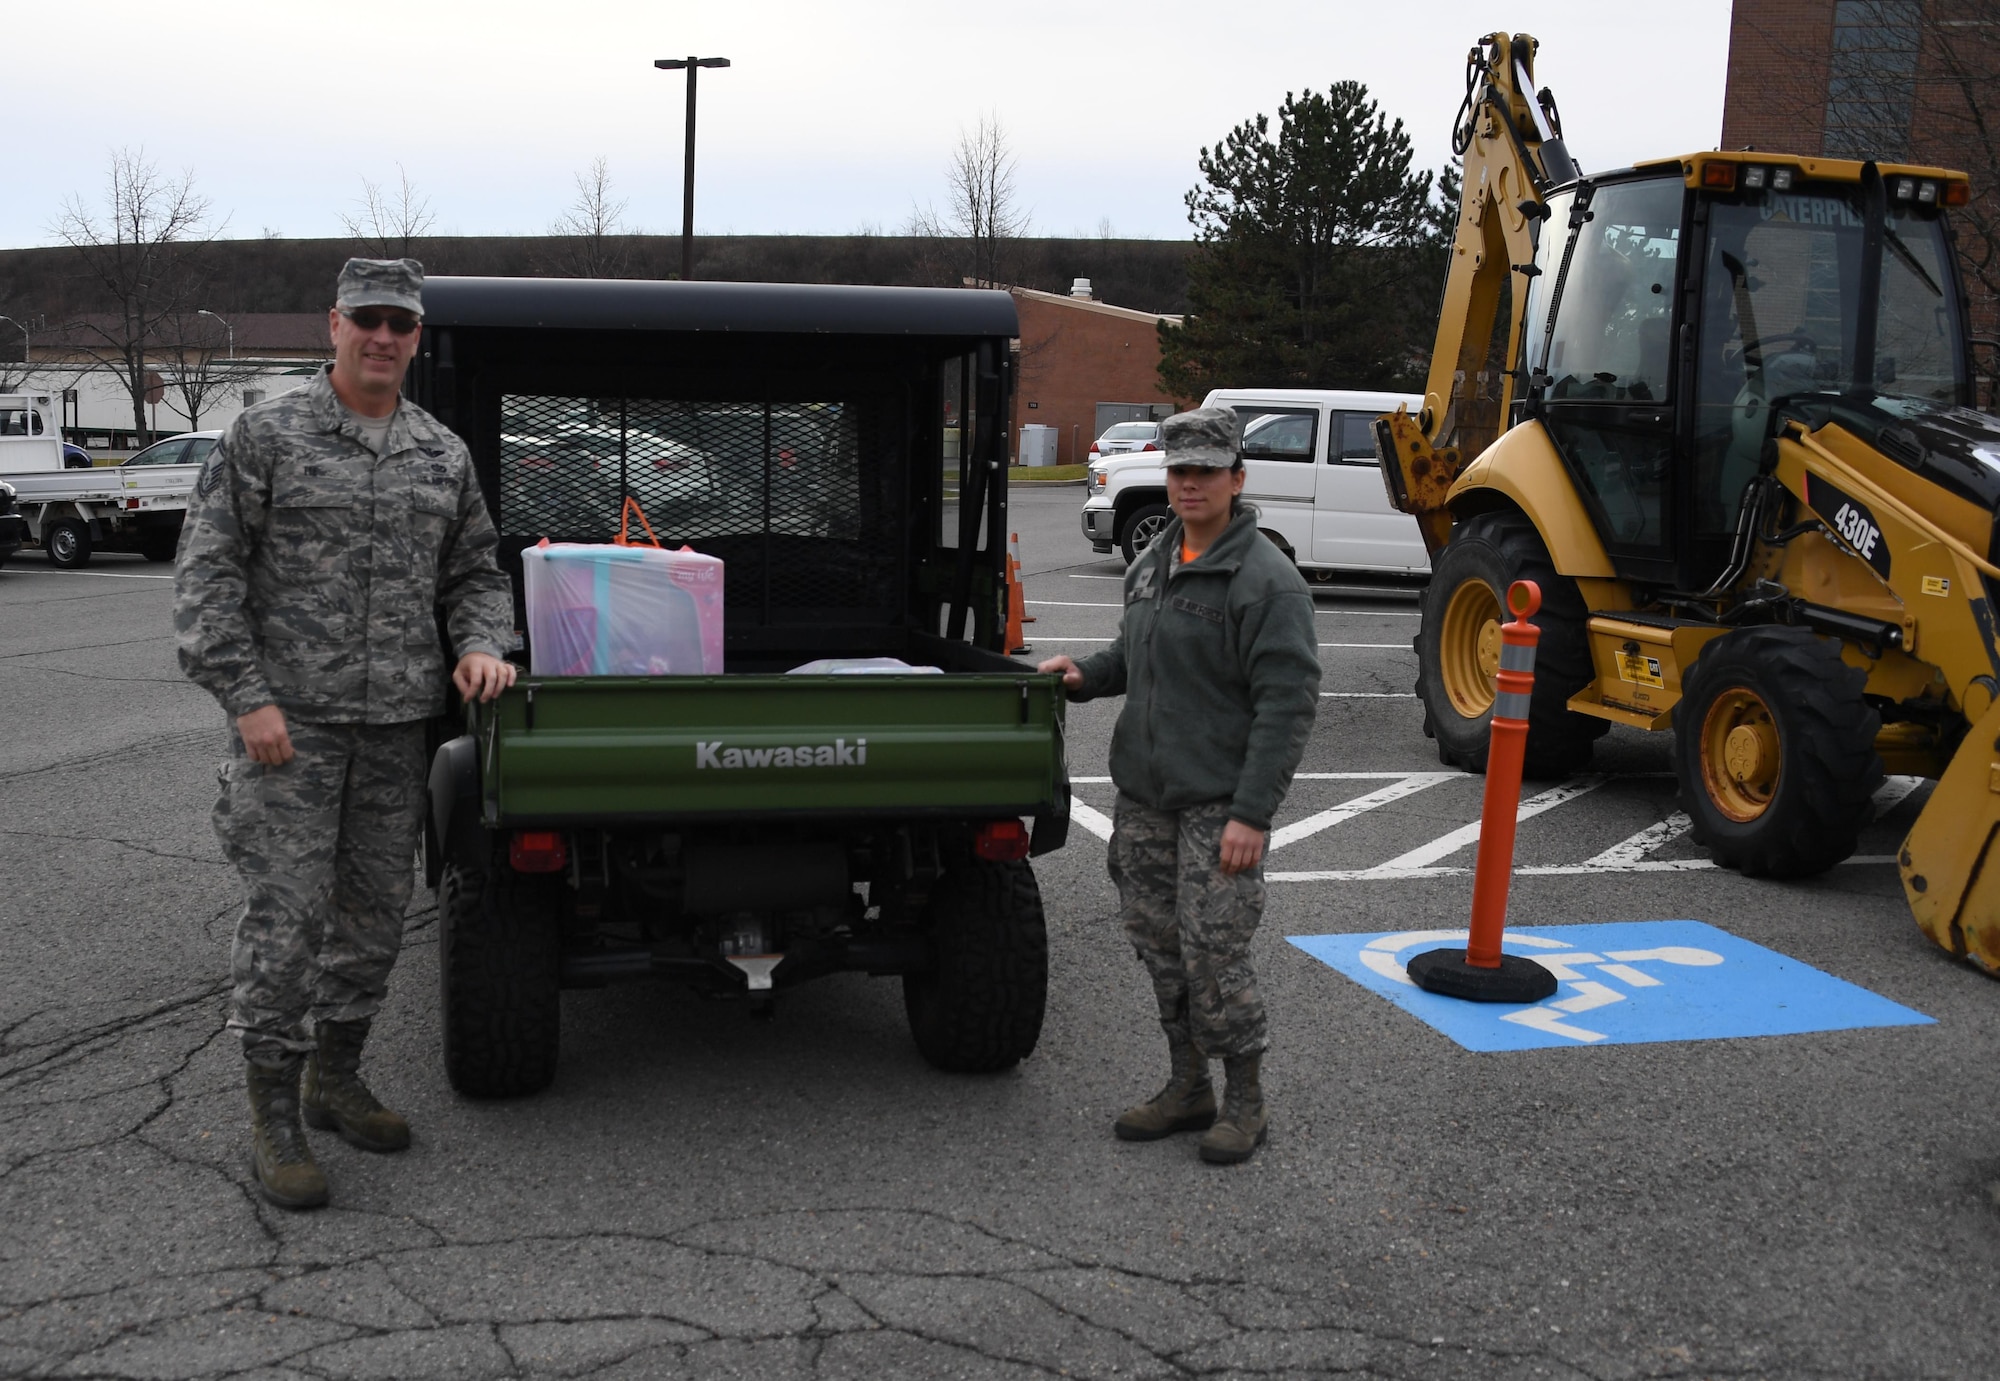 Staff Sgt. Ashley Wiley, aircraft structural maintenance technician and Angel Tree program manager at the 911th Airlift Wing, poses with Senior Master Sgt. John Lee at the Pittsburgh International Airport Air Reserve Station, Dec. 4, 2016. Lee, 911th AW member and coordinator with Heroes Supporting Heroes, dropped off gifts donated by HSH to benefit the families of Airmen in need. (U.S. Air Force photo by Staff Sgt. Marjorie A. Bowlden)